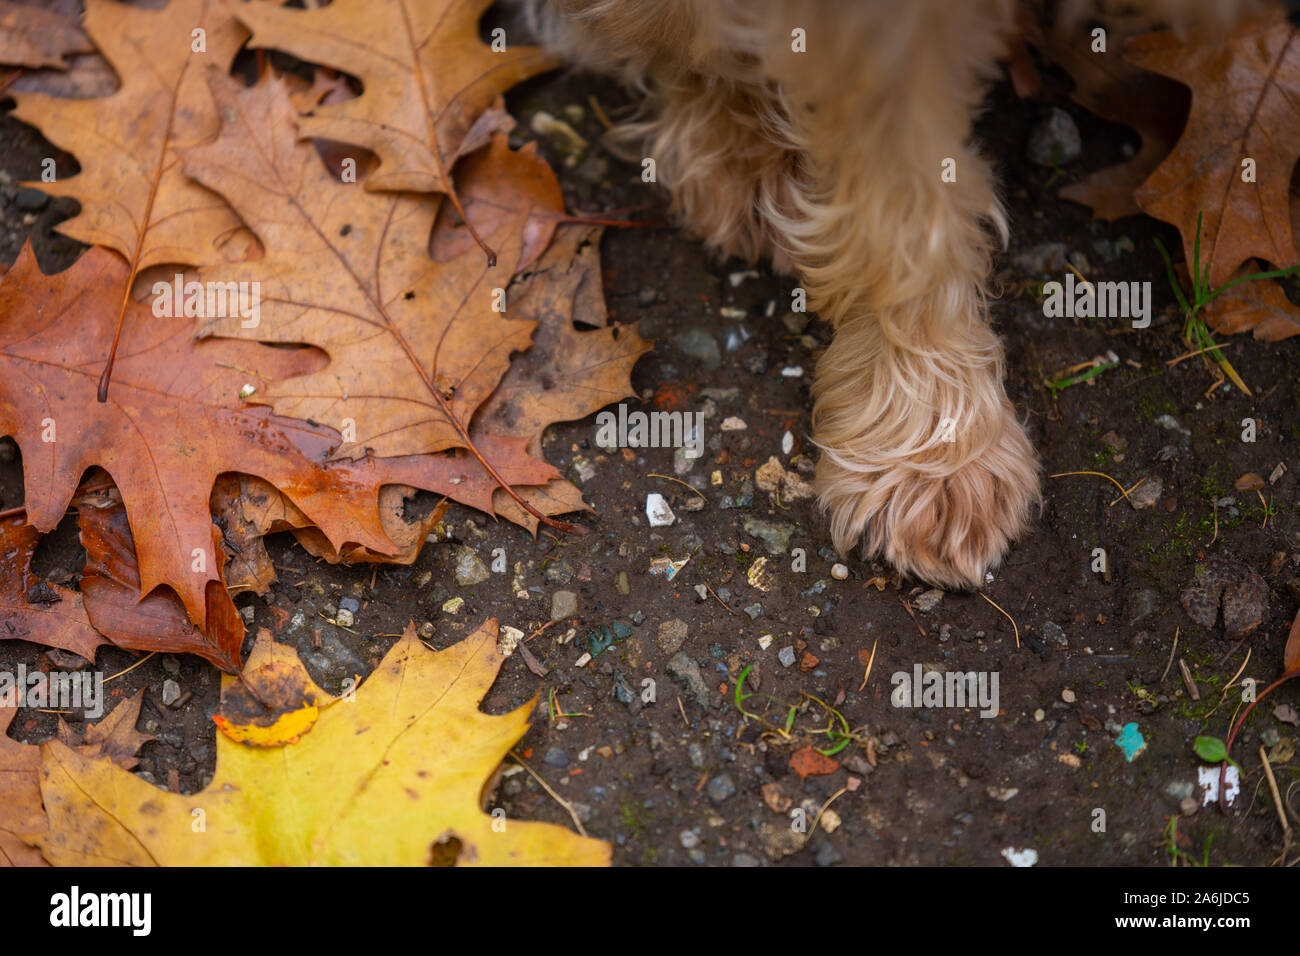 a dog is sitting next  to leaves that got their brown colors from autumn Stock Photo